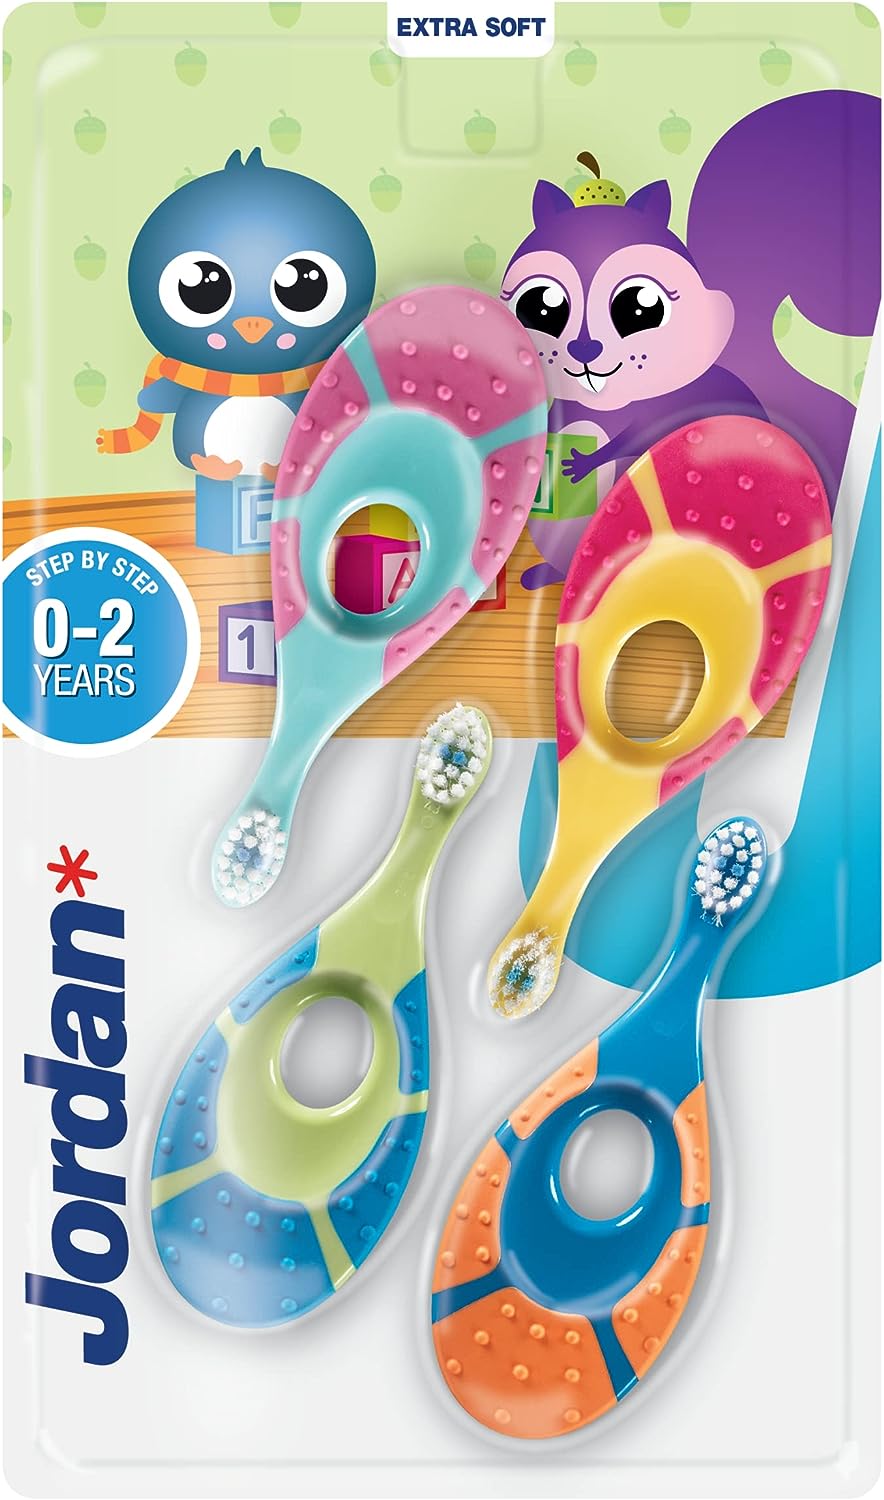 Jordan® Step 1 Baby Toothbrush | Baby Toothbrush 0-2 Years | The Original Toddler Toothbrush with Extra Soft Bristles and Soft Teether for Baby Rubbers and Easy Grip 4 Pack - Baby Bliss